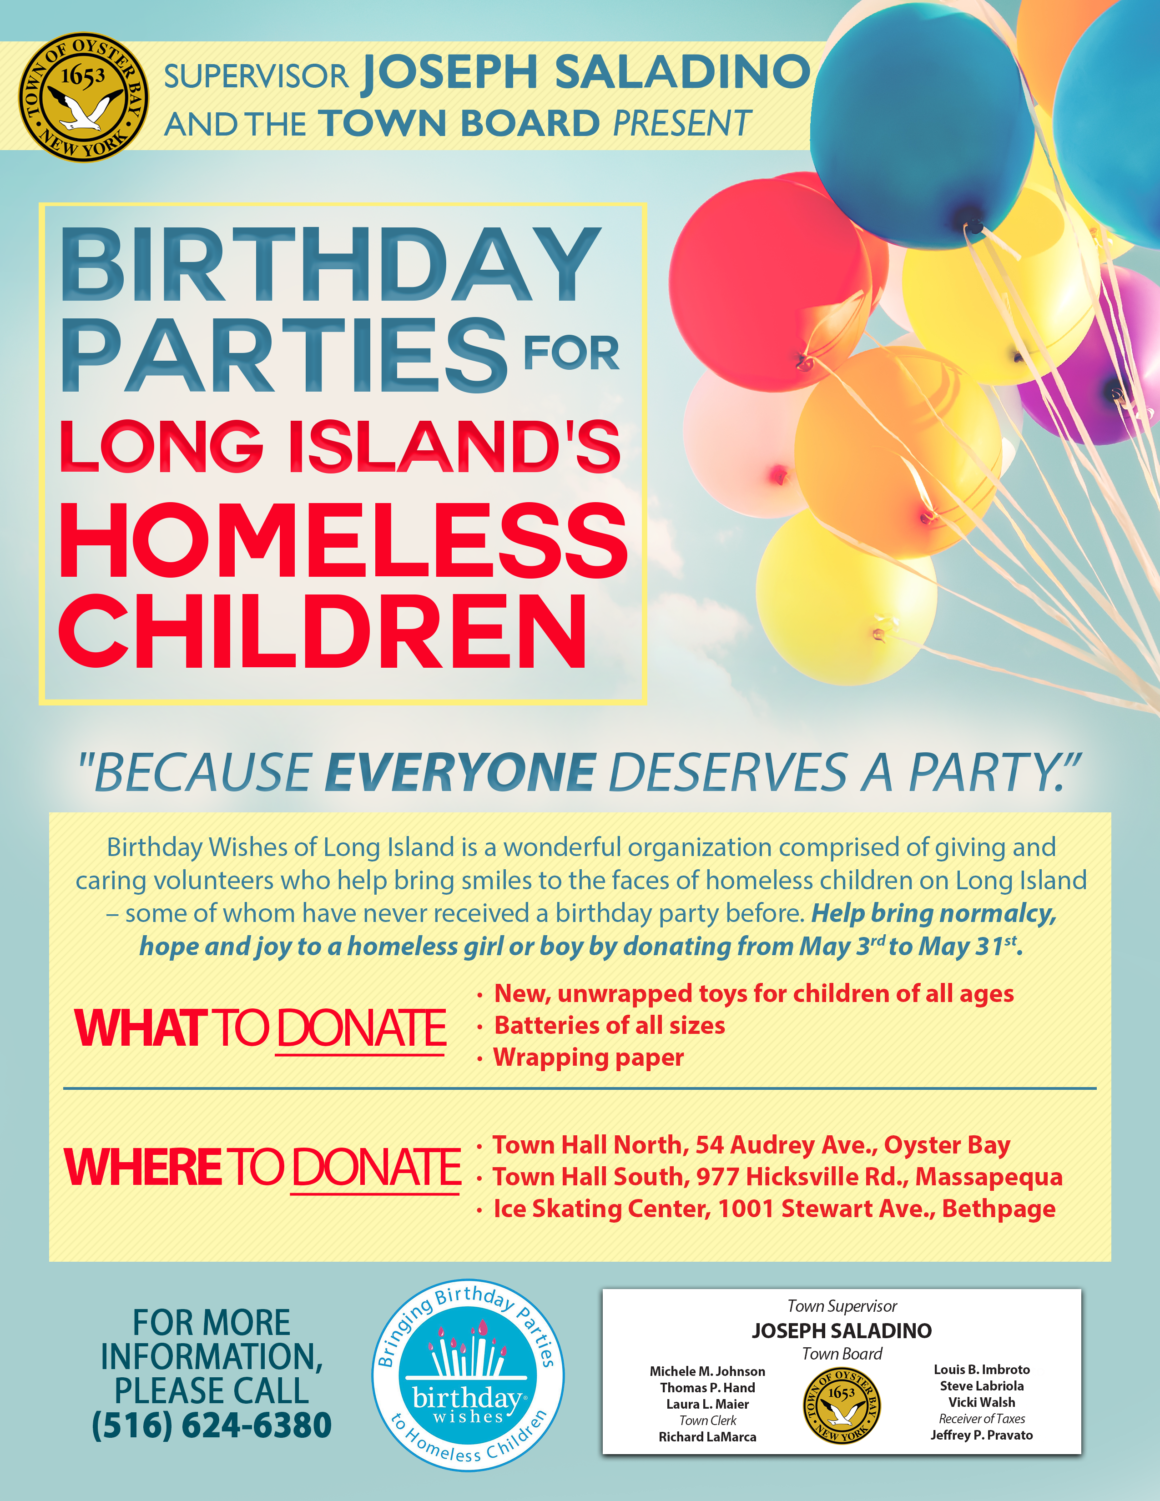 Collection Drive to Support Birthday Parties for Homeless Children